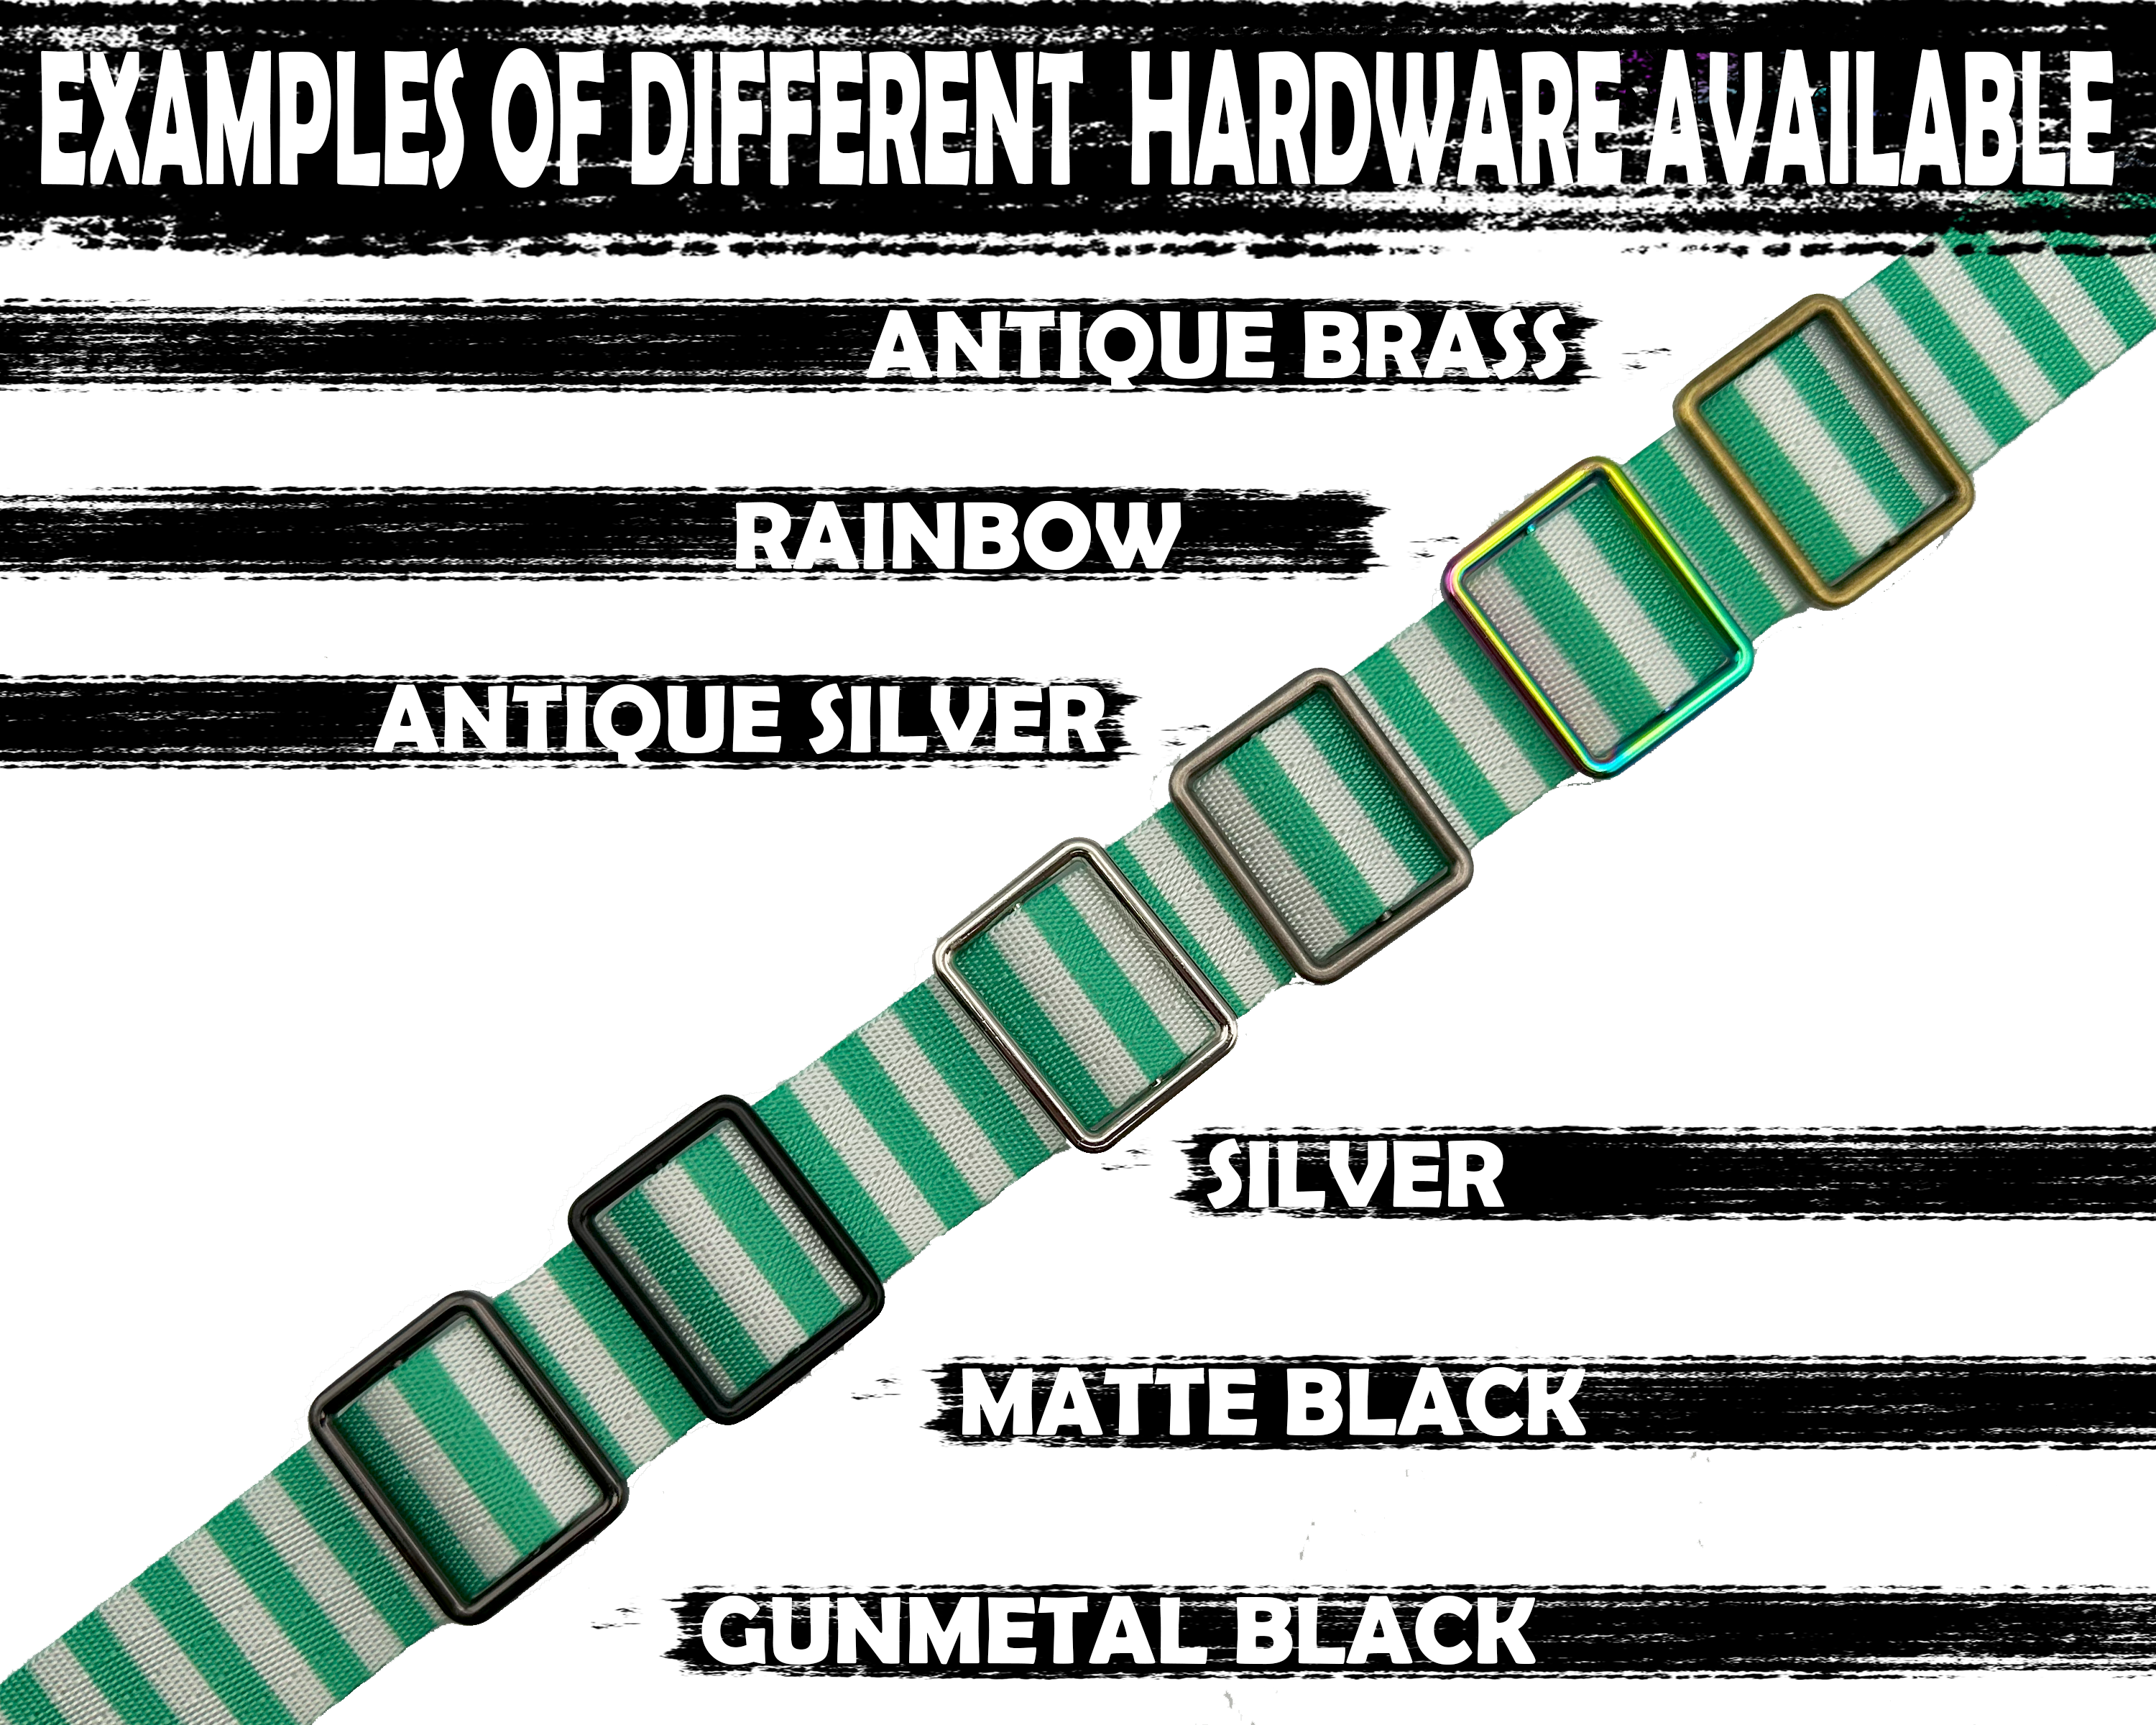 25mm Green and White Stripe Webbing Straps for Bag Making